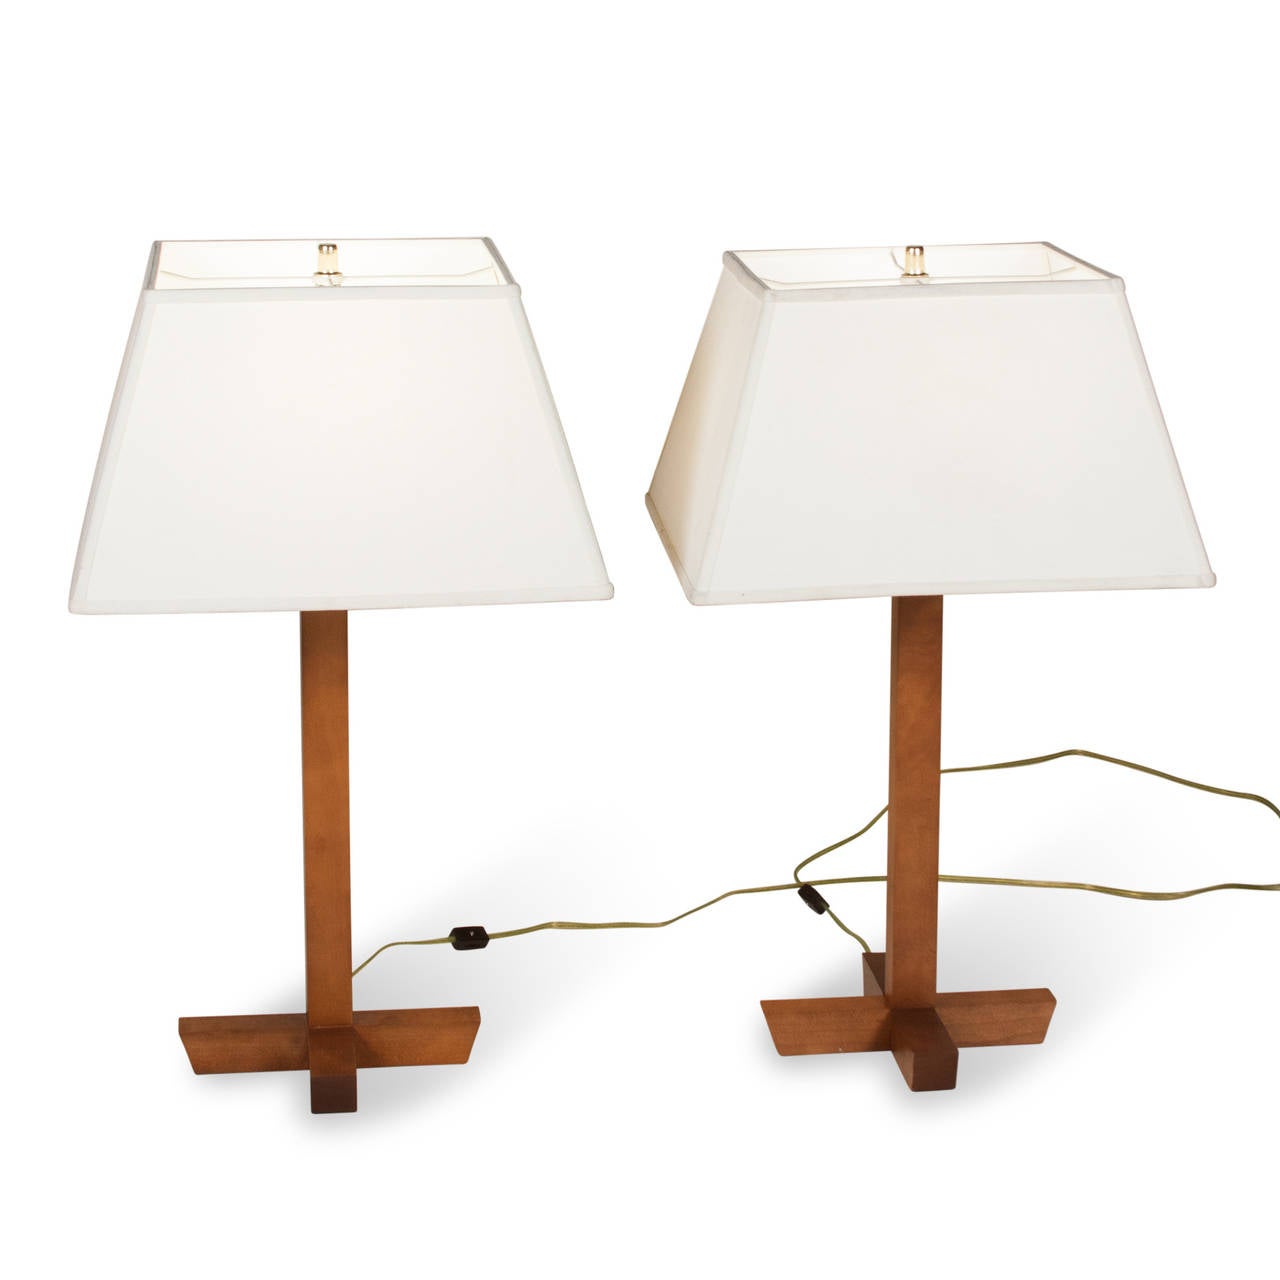 Pair of walnut table lamps, a single square column mounted on a x-base of walnut, American 1970s. Overall height 27 in, base measures 10 in square. Height to top of socket 19 1/2 in. Wood is 1 1/2 in square. Shade measures top 11 1/2 in square,